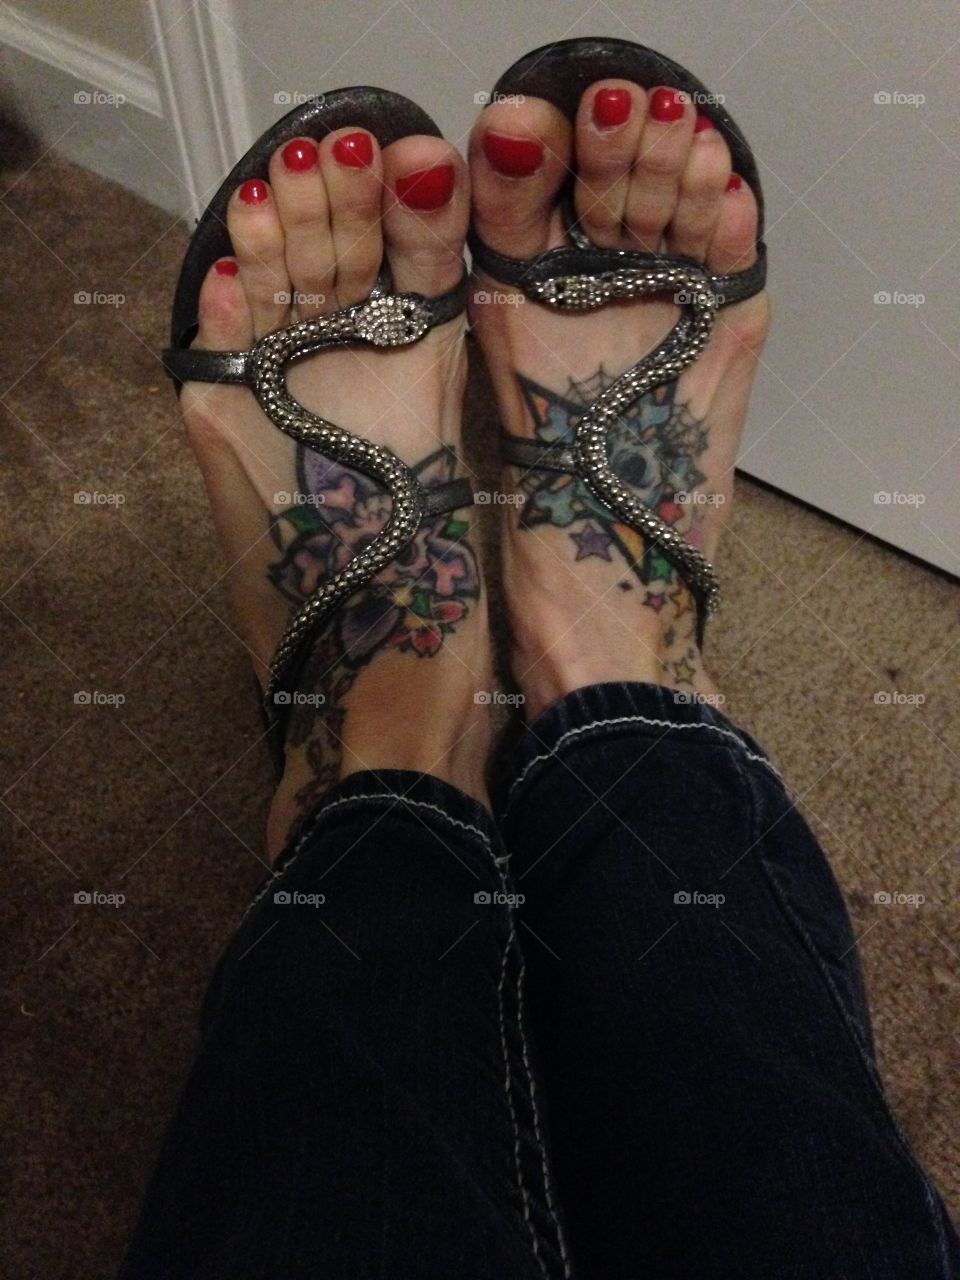 Cool shoes & tattoos